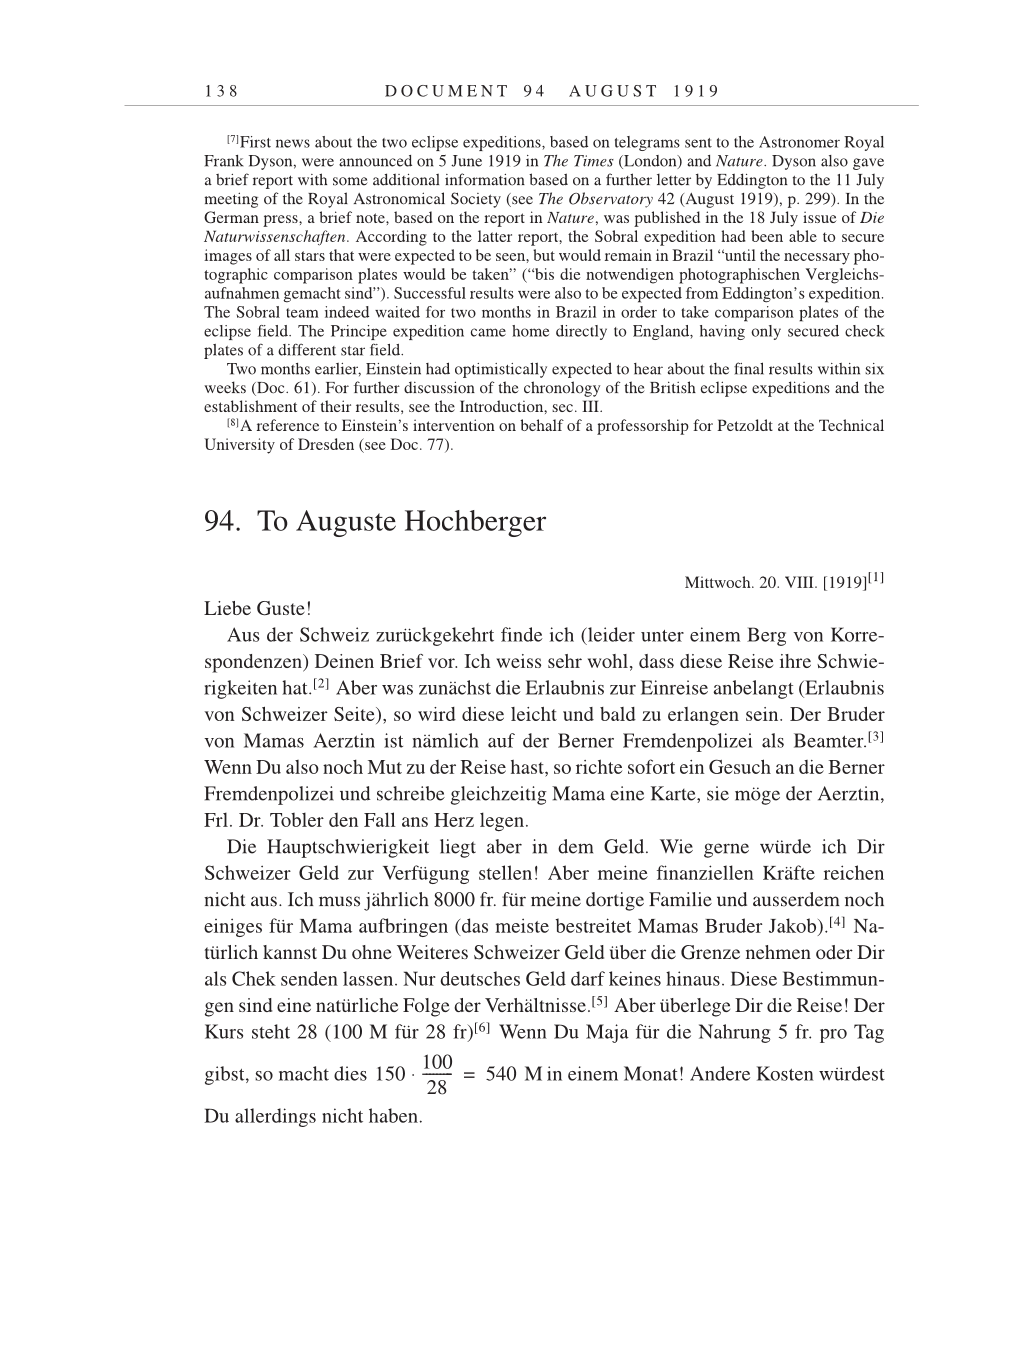 Volume 9: The Berlin Years: Correspondence January 1919-April 1920 page 138